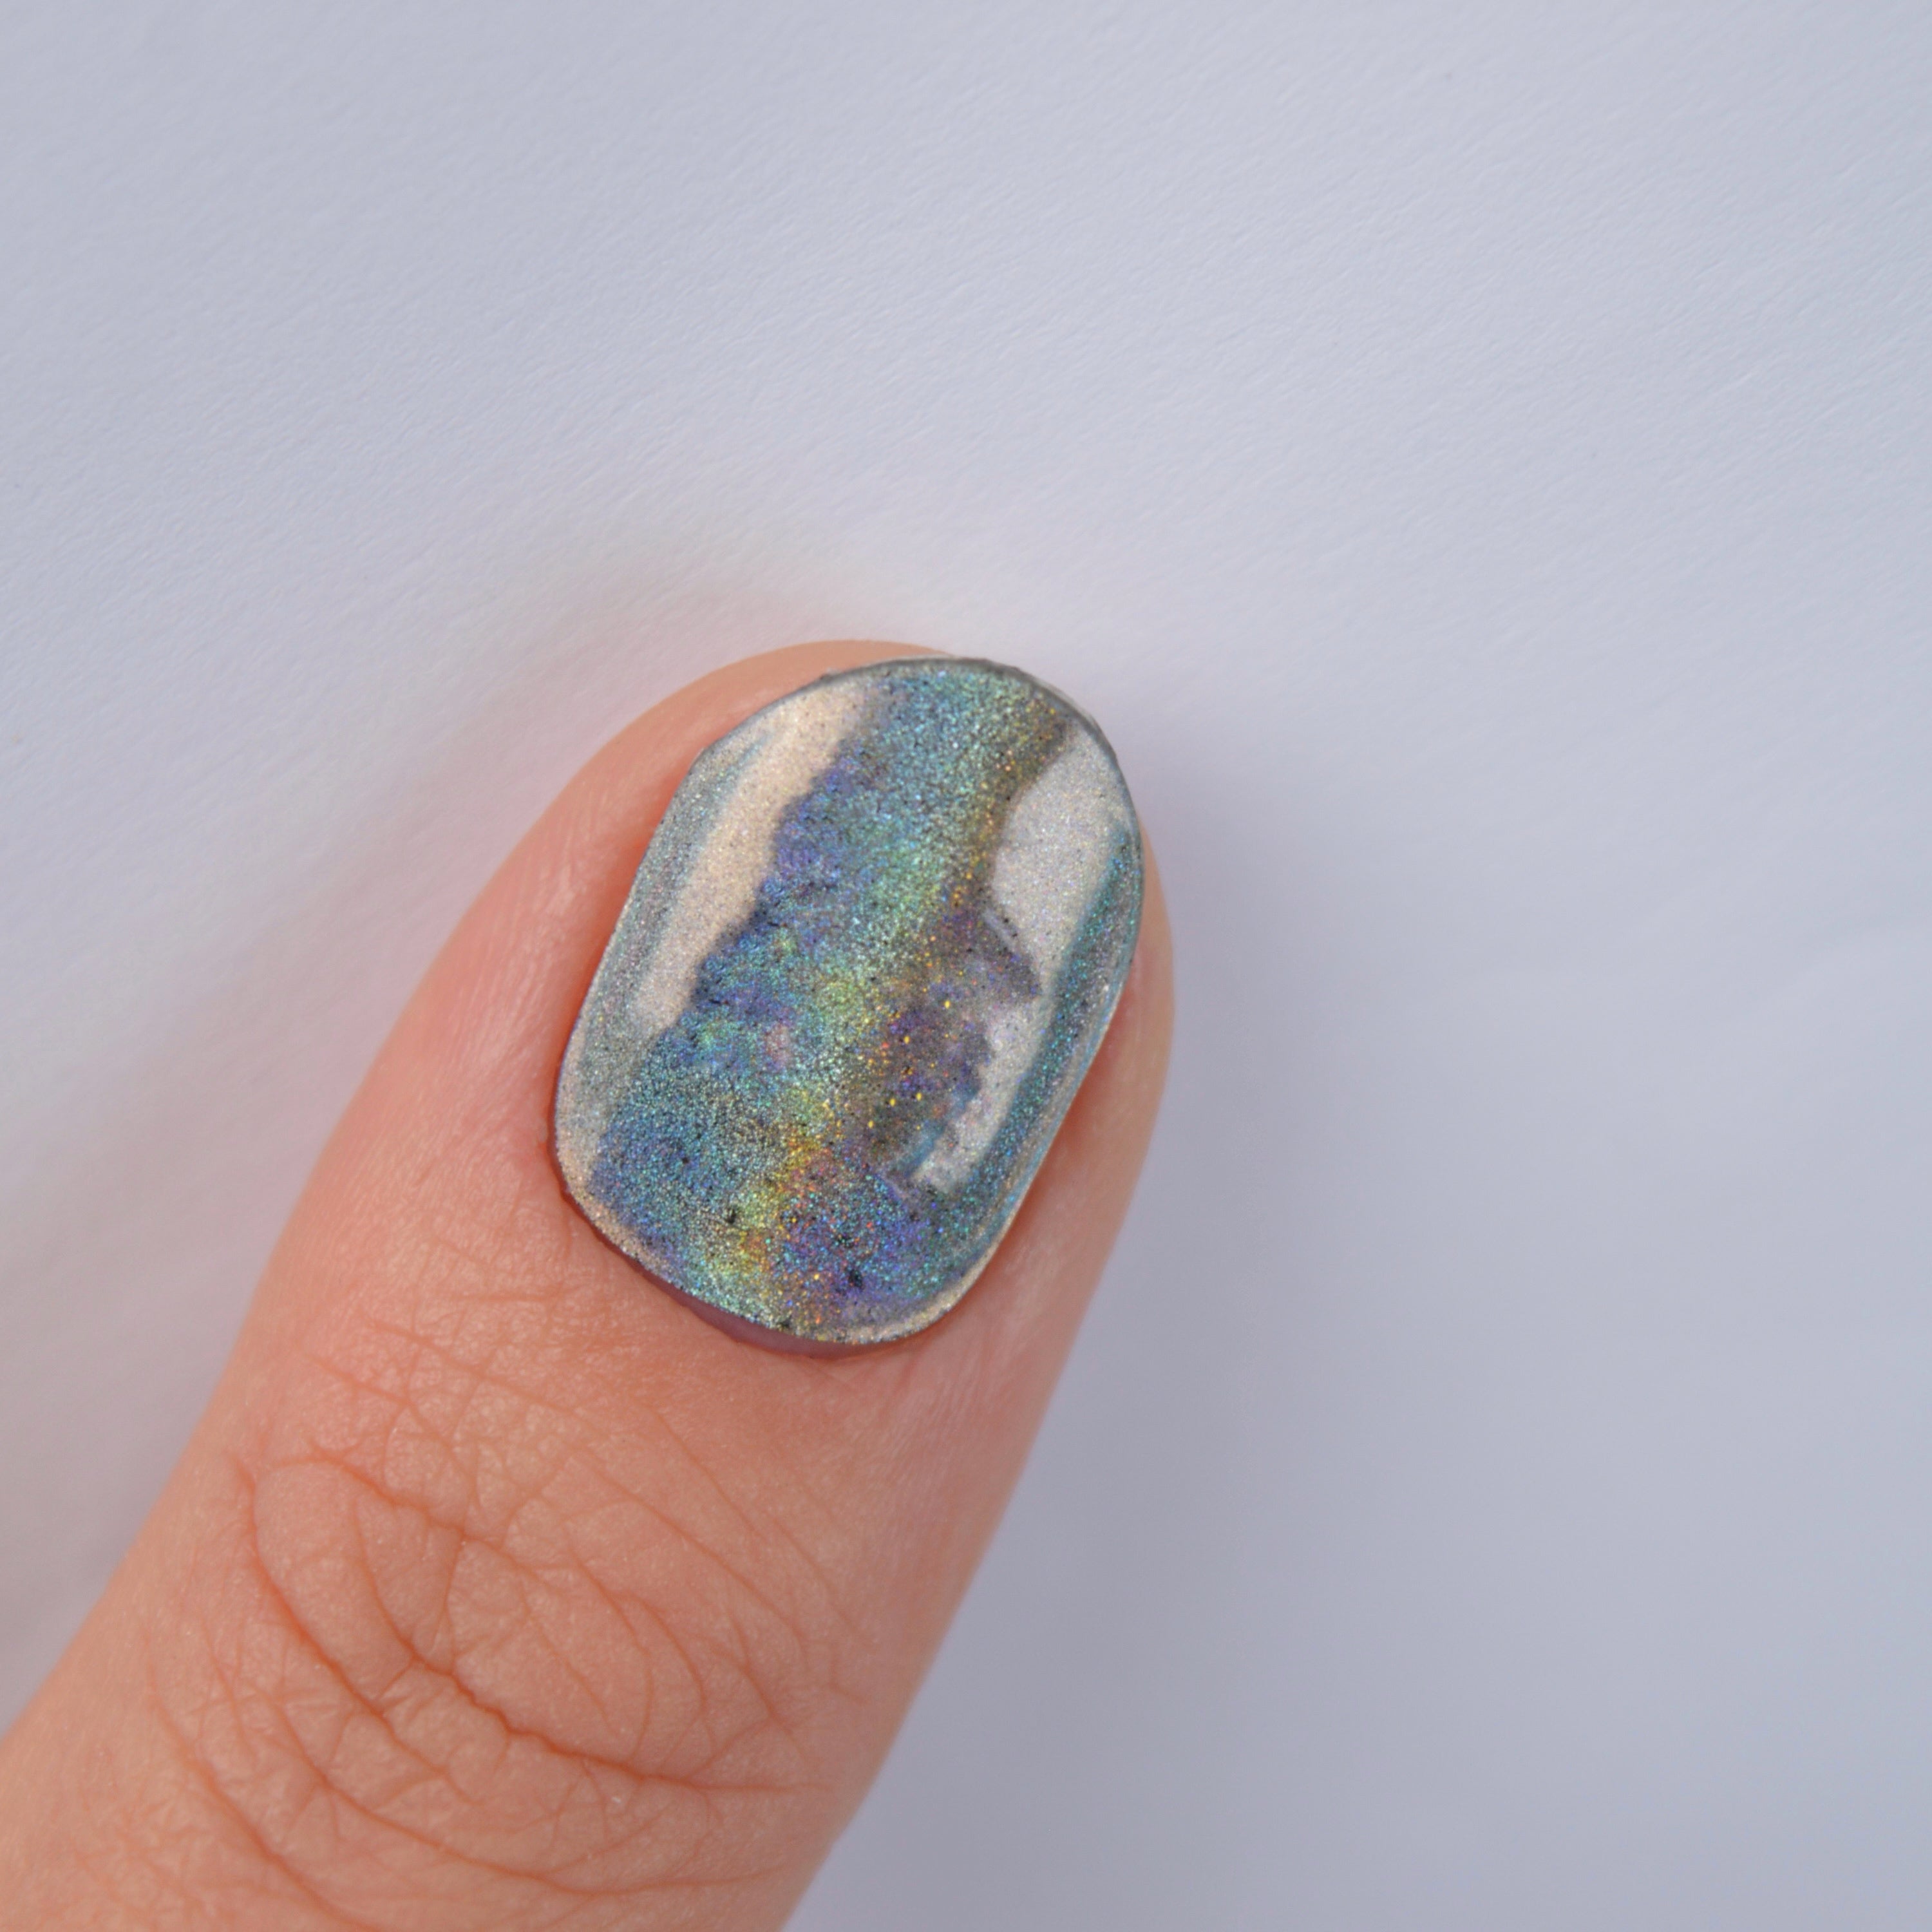 PREORDER (29/5 DISPATCH) Holo Holo (Silver) | Super Jellies DIY Semi Cured Gel Nail Wraps